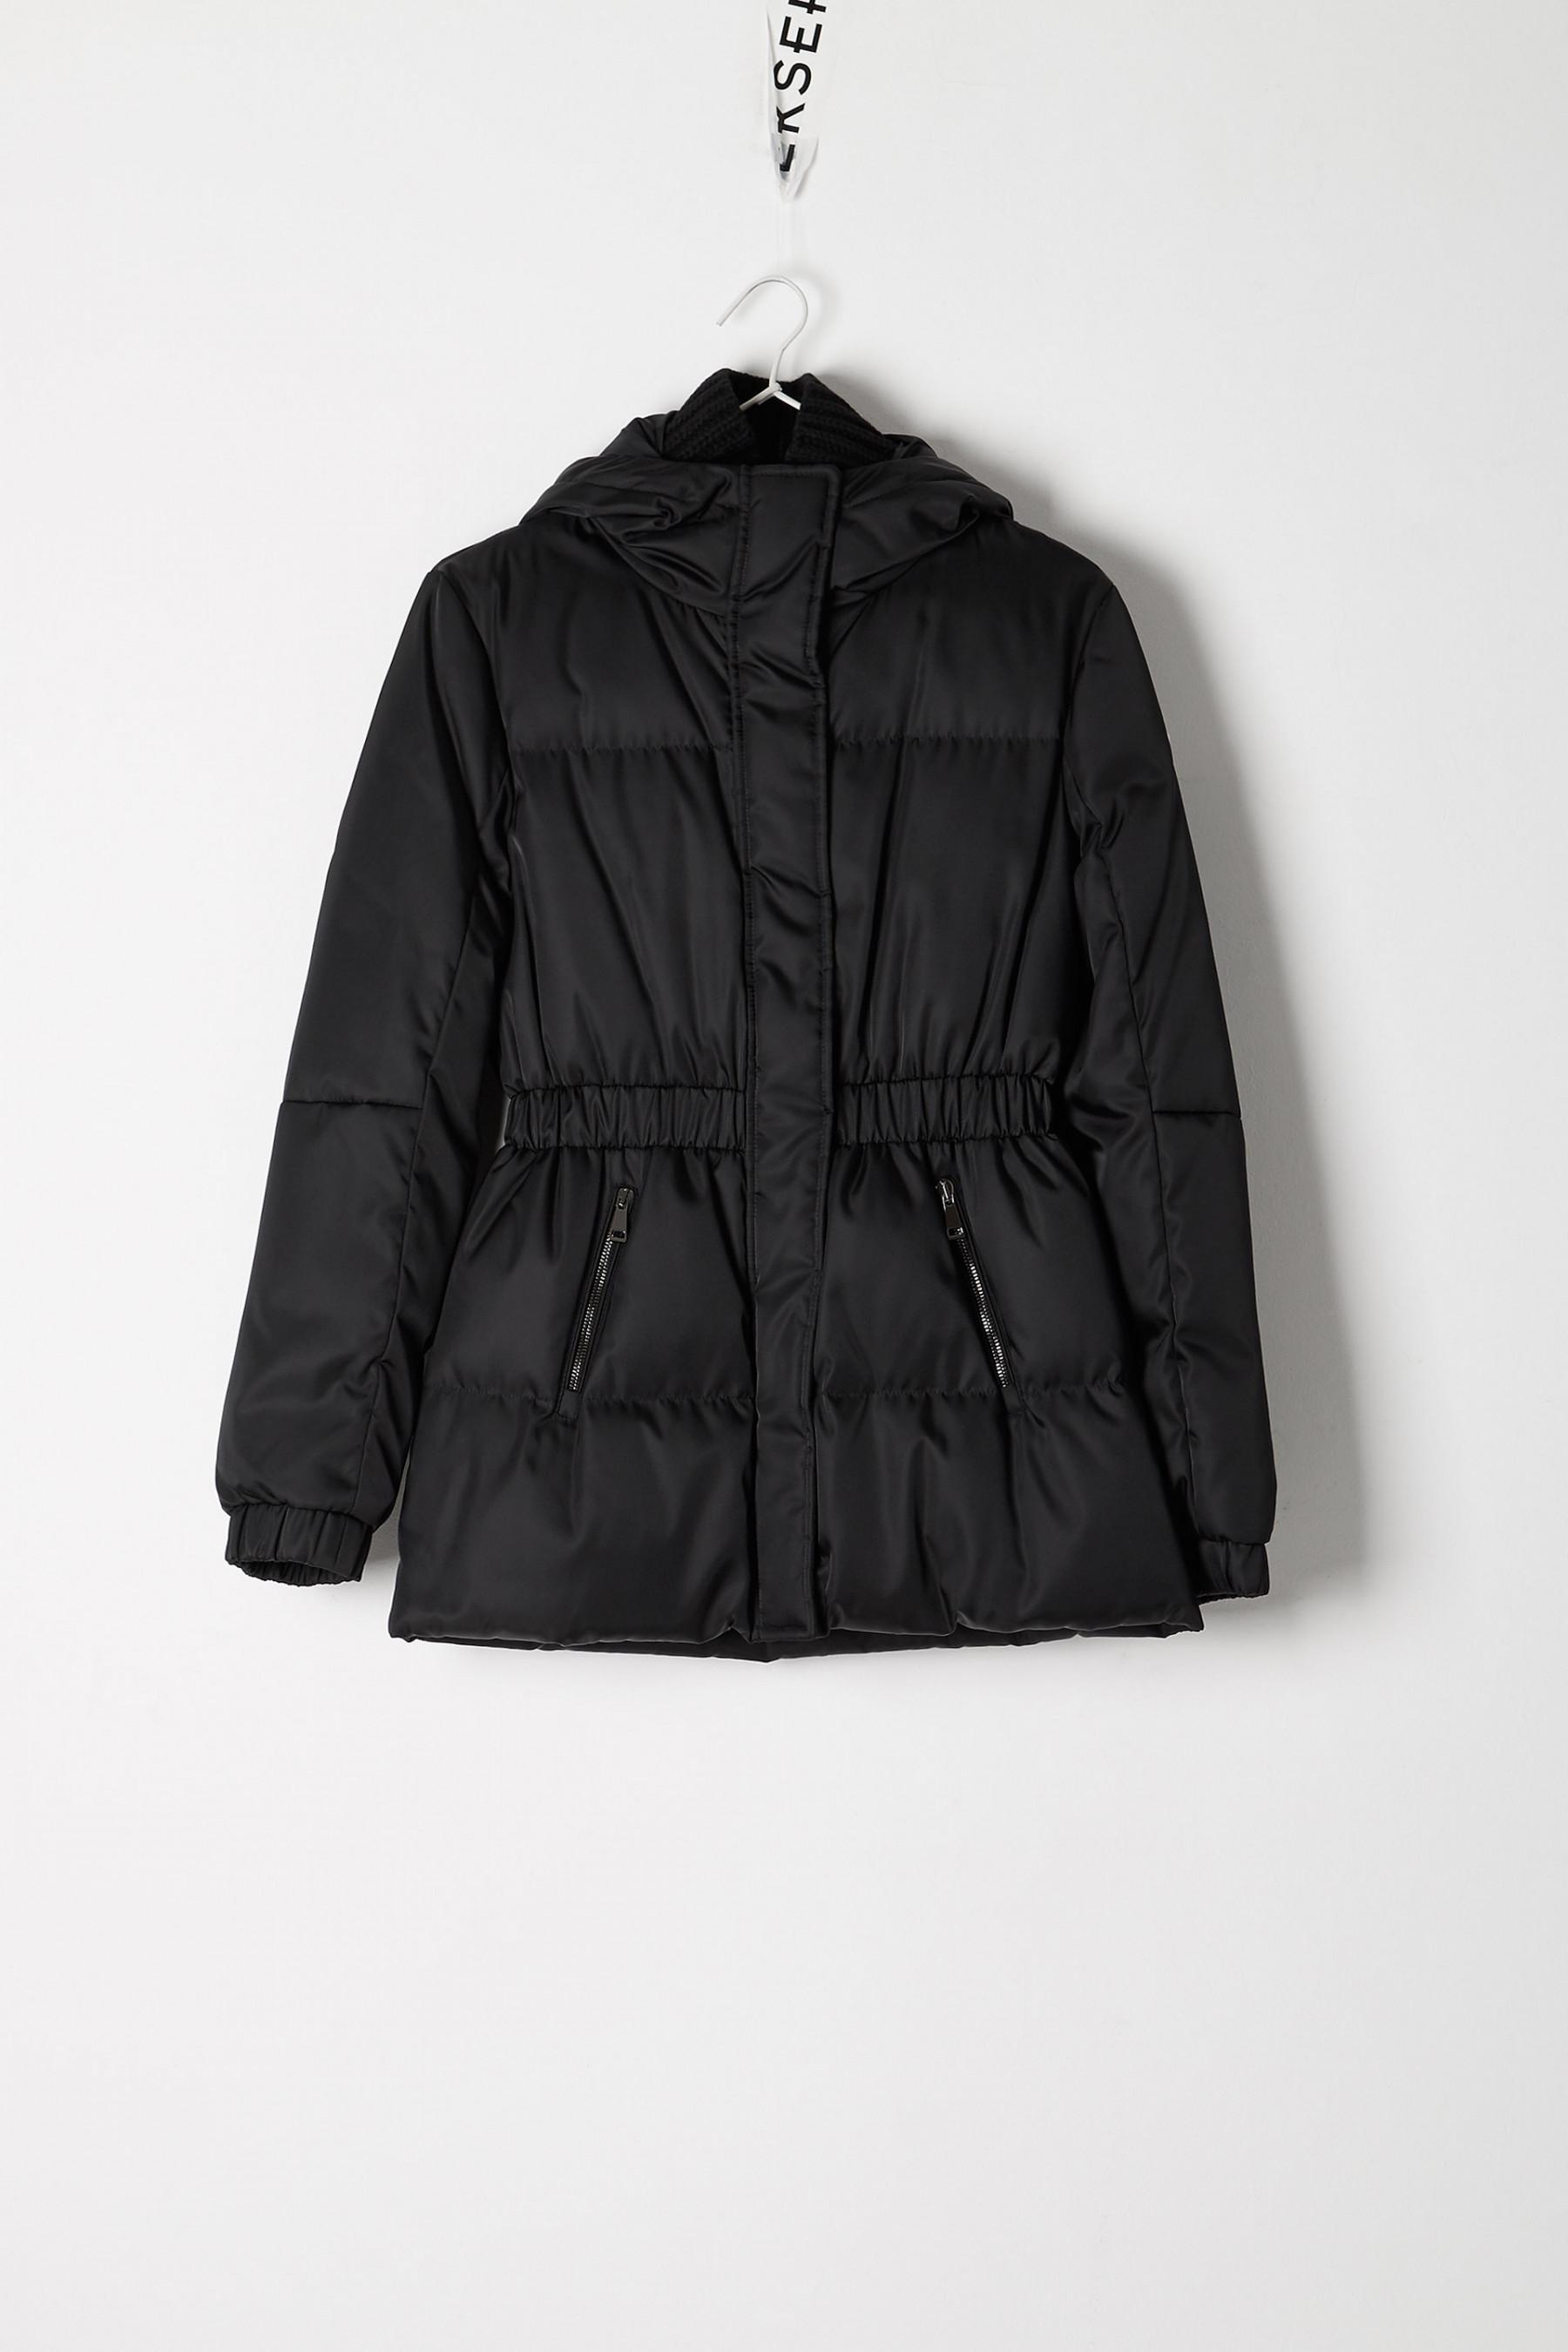 Moncler Synthetic Fatsia Jacket in 